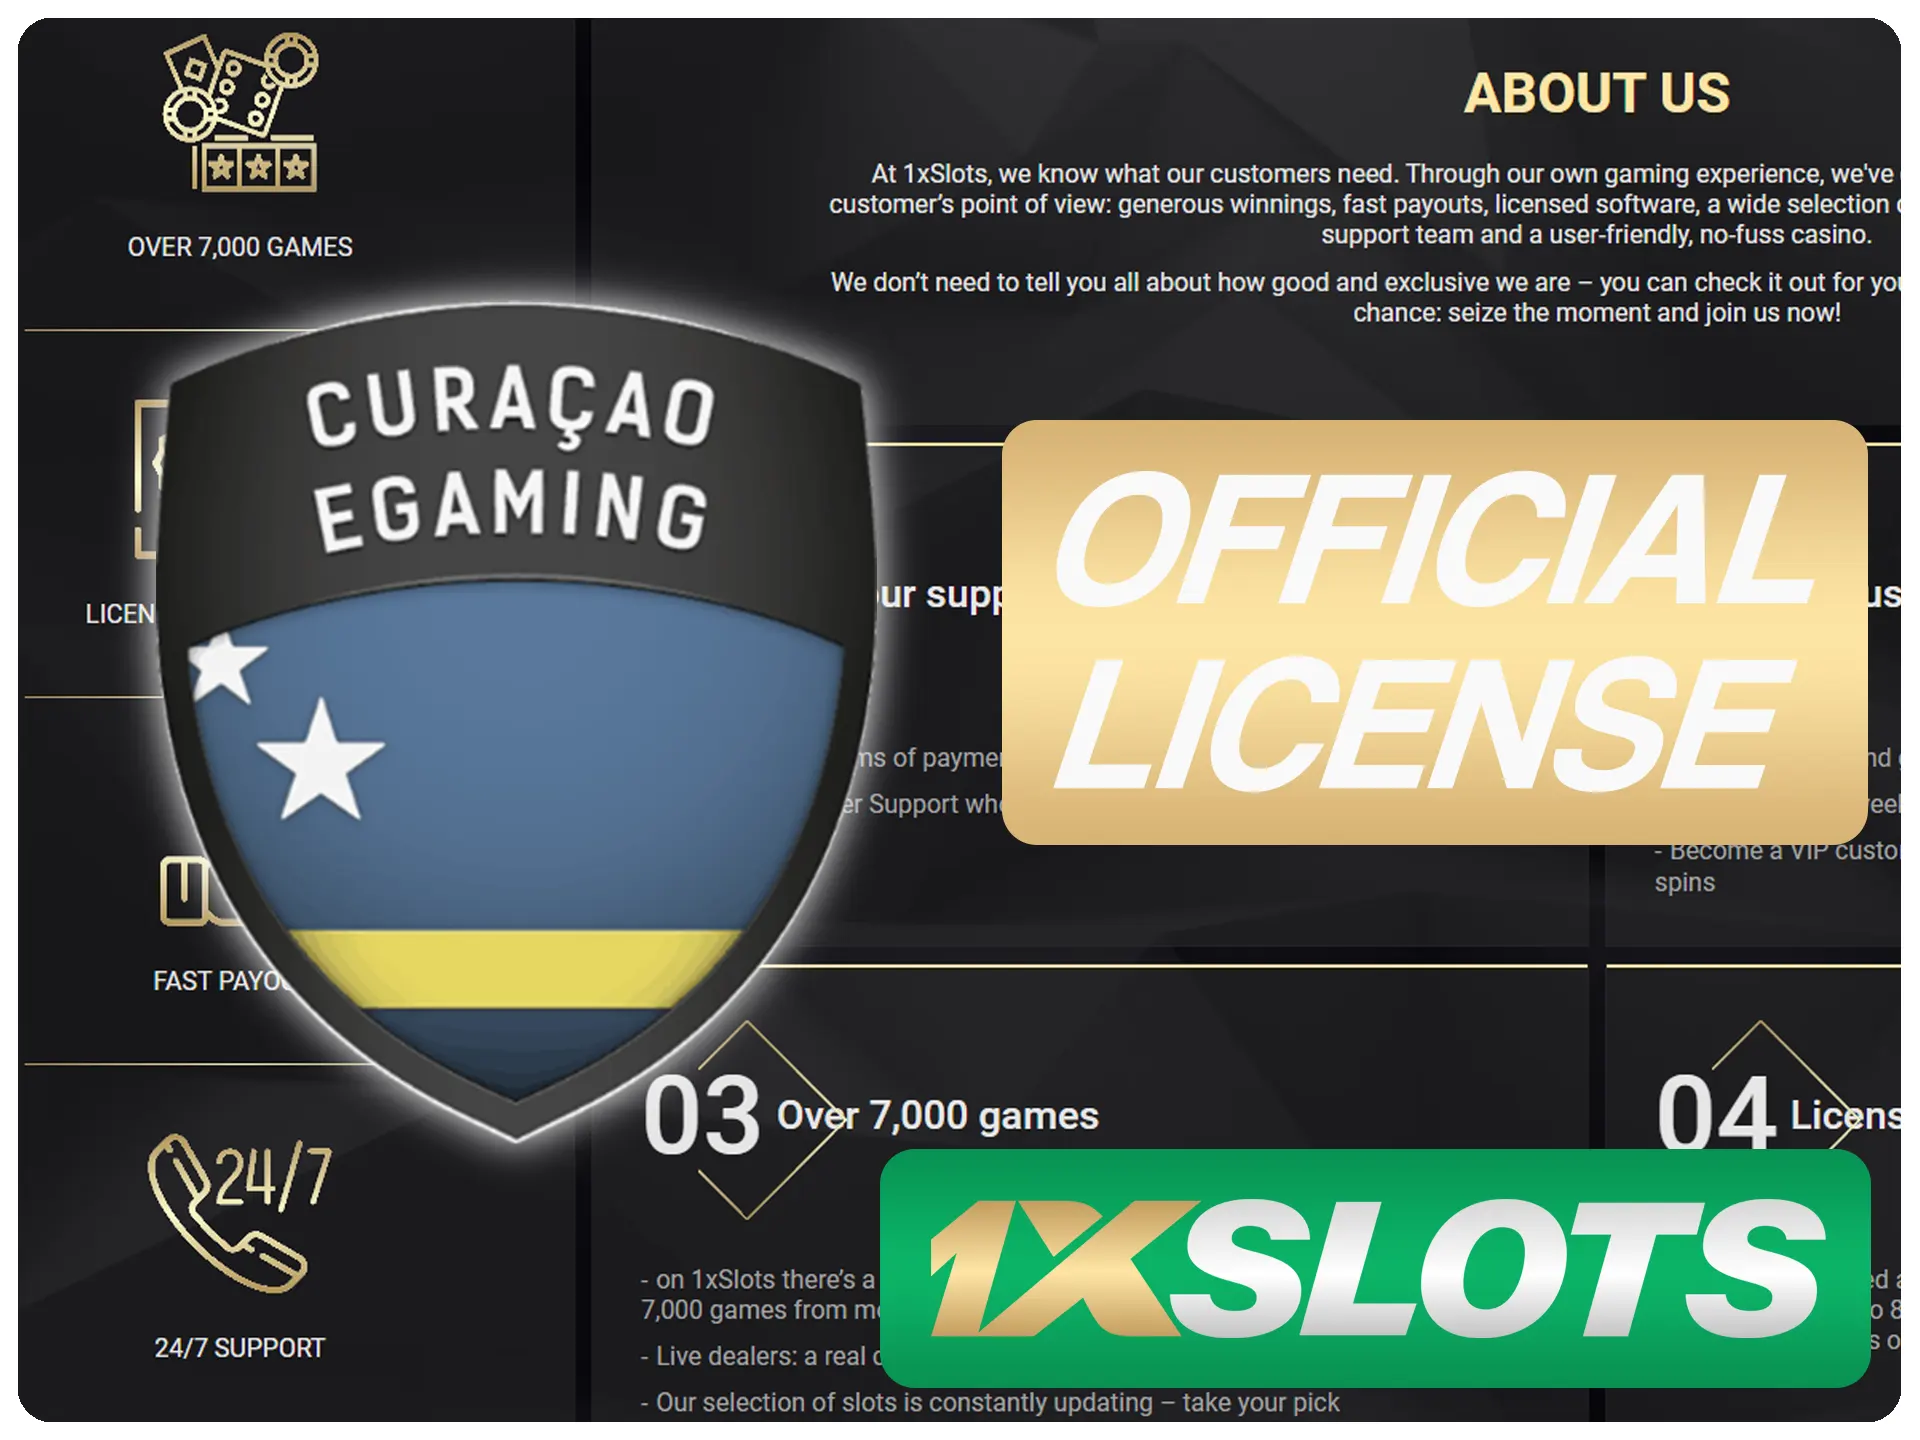 1xSlots is a licensed betting company.